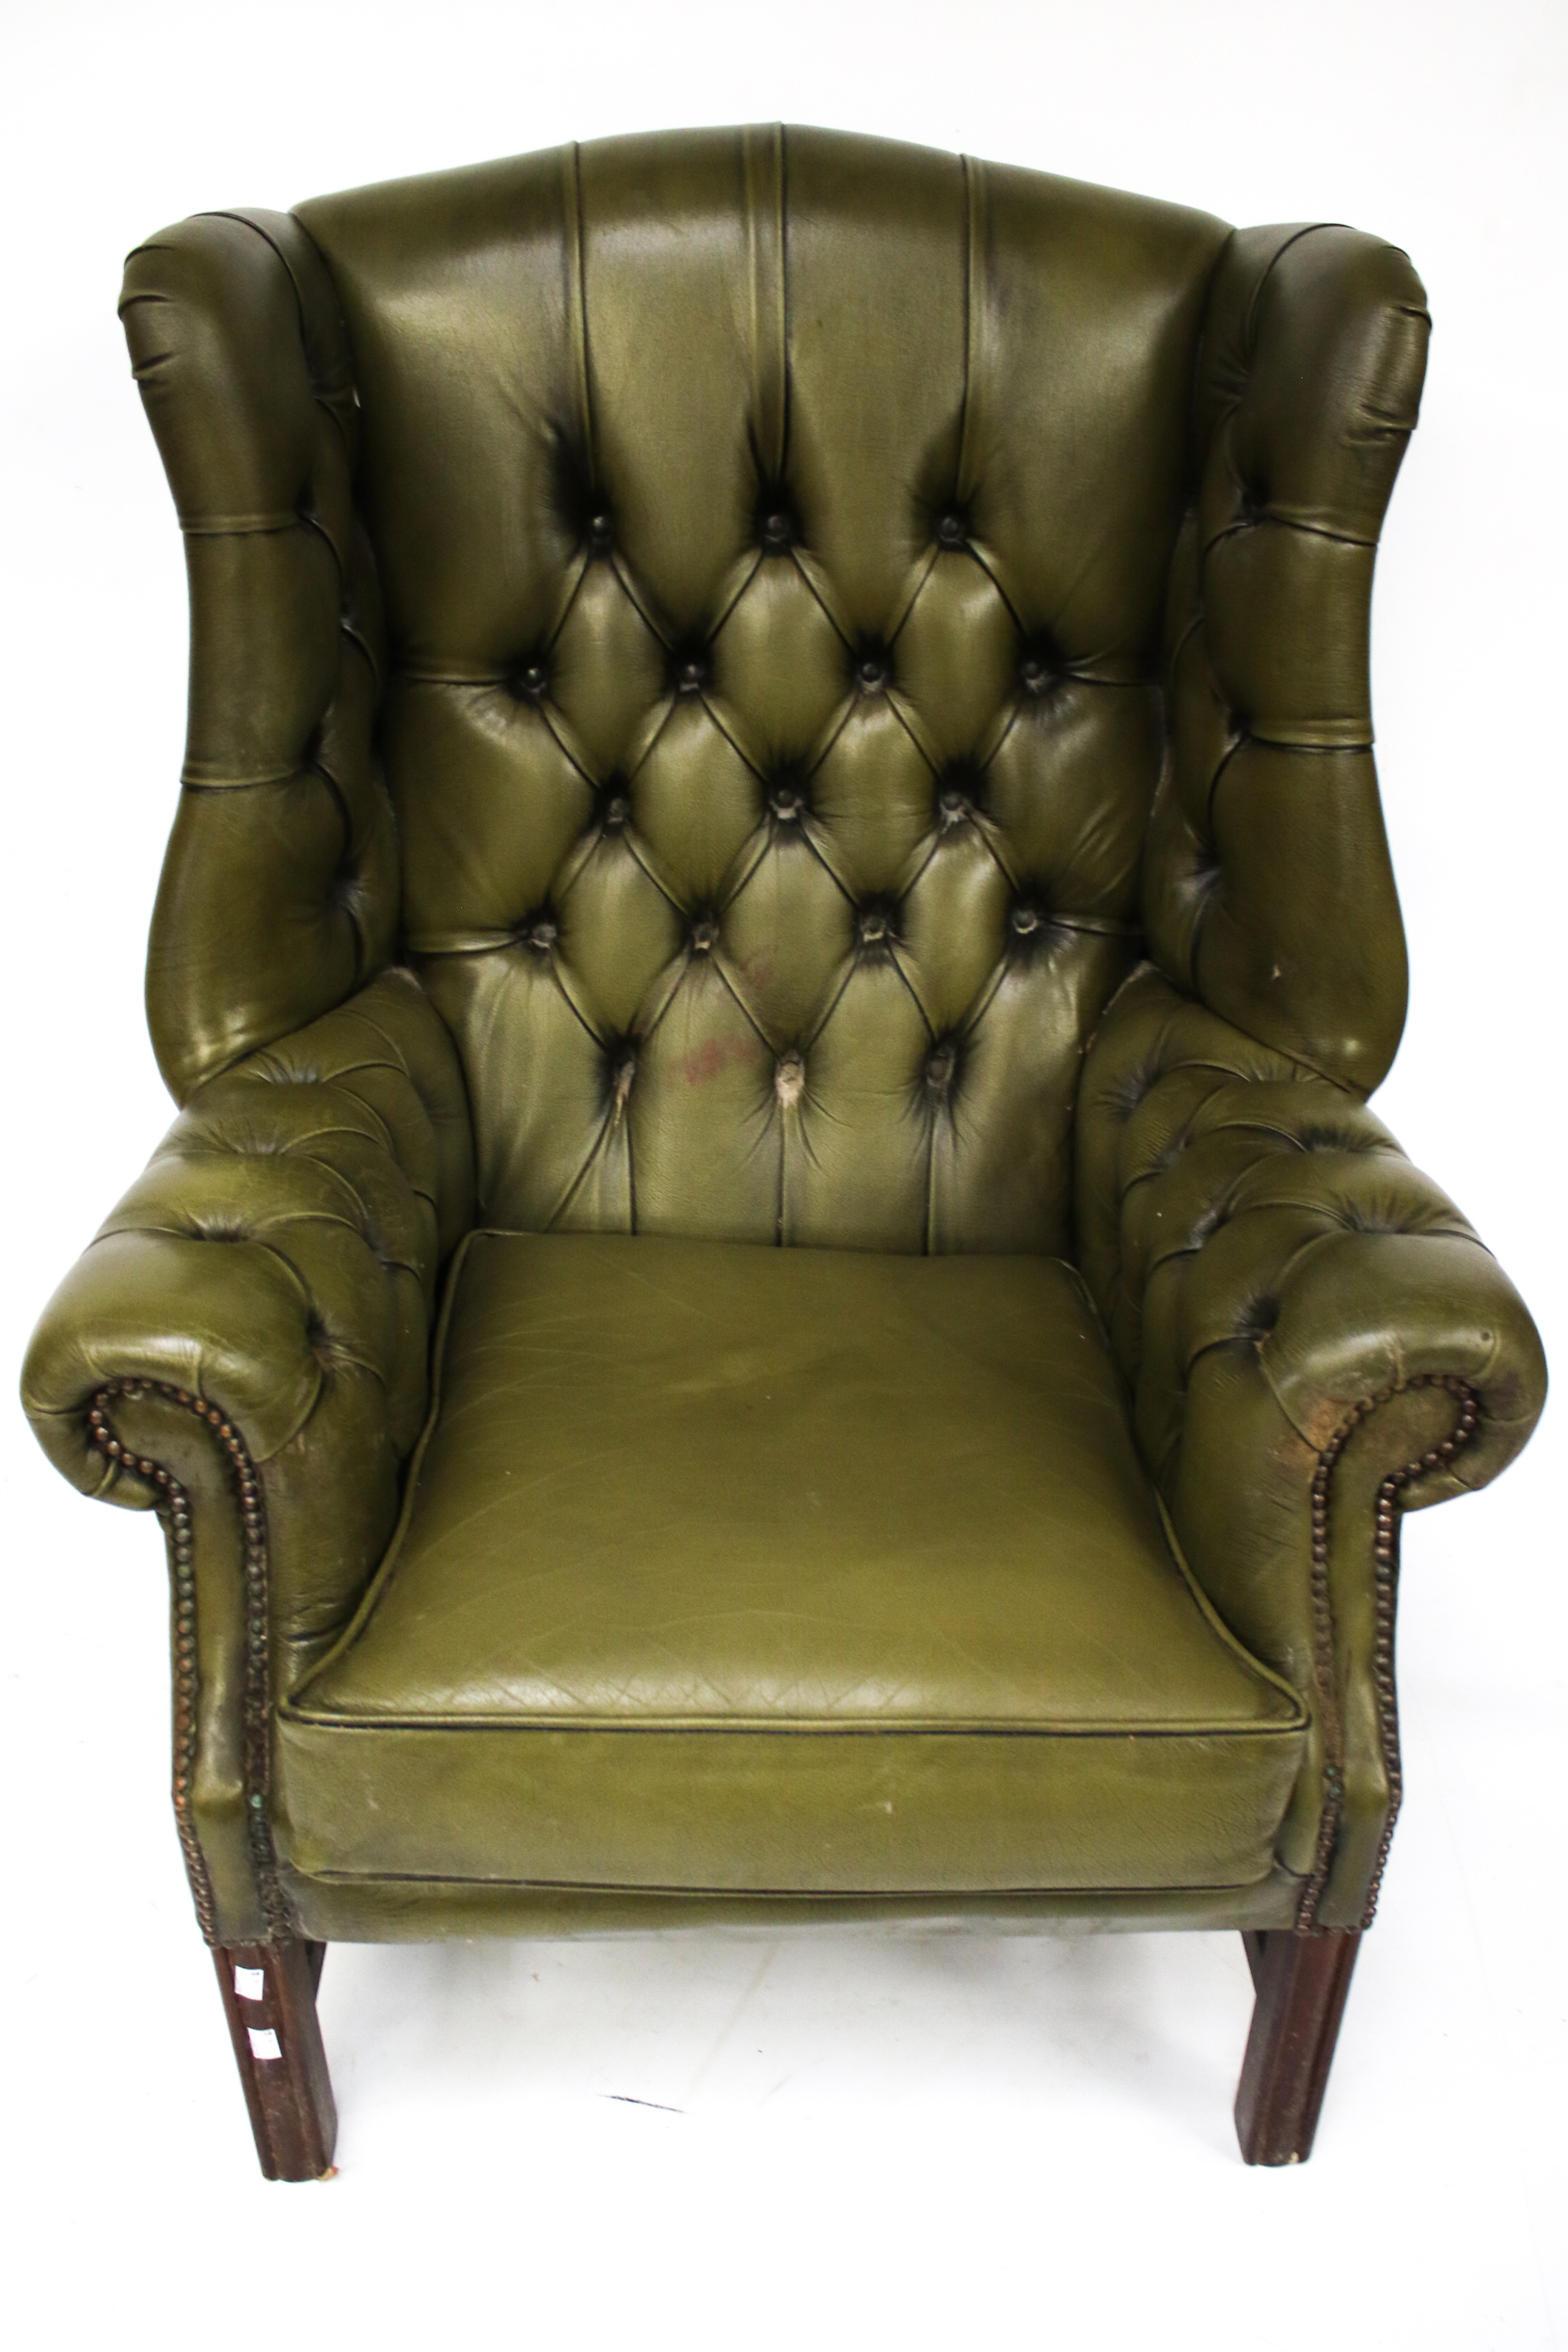 A 20th century Georgian Style green leather button back upholstered wing back armchair and - Image 2 of 3